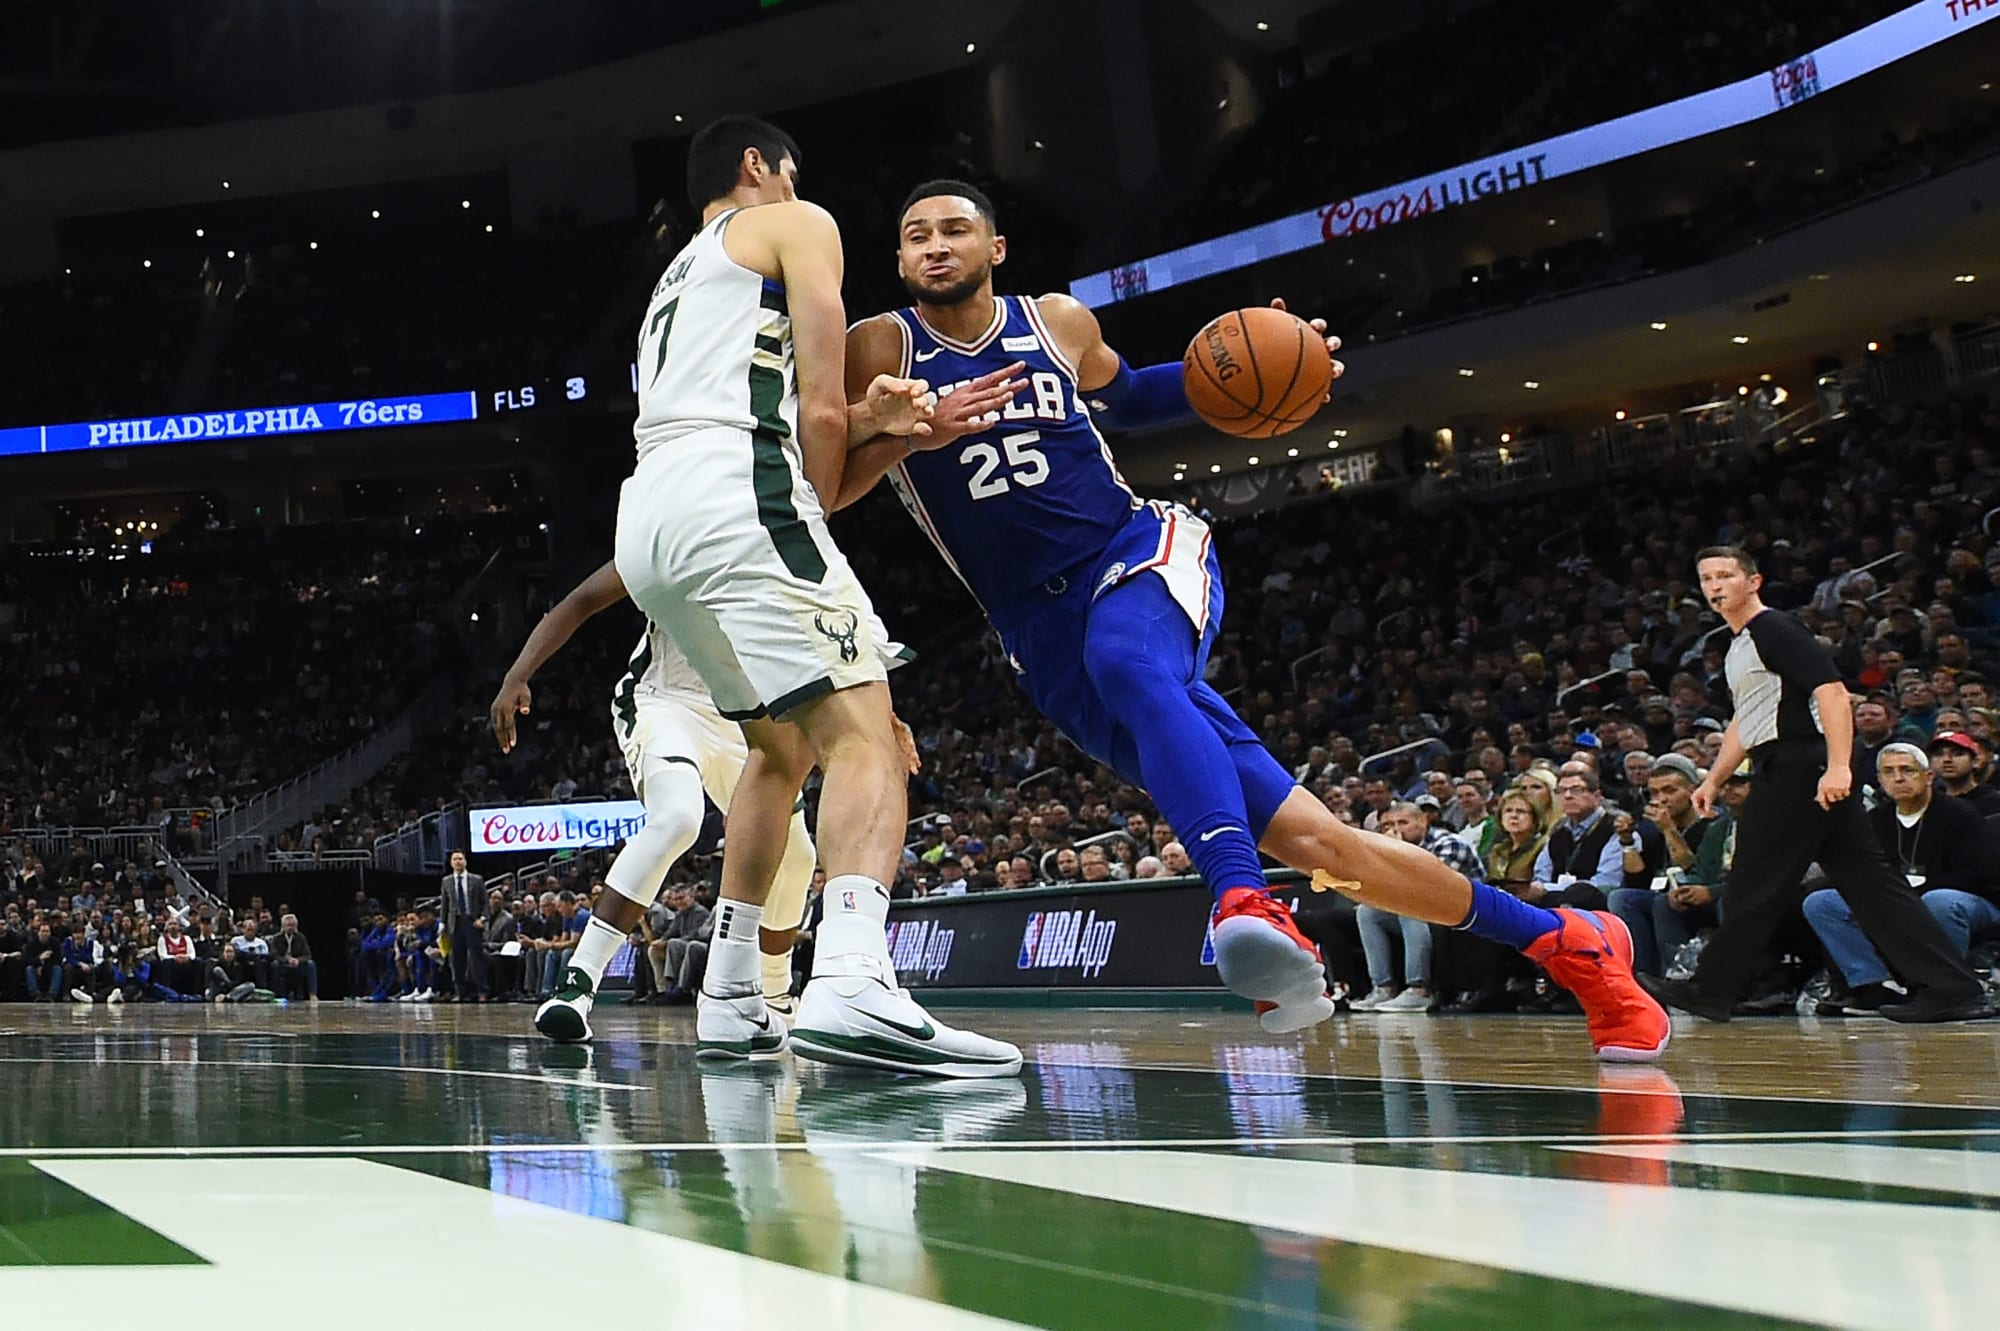 Checking in on the Ben Simmons - Donovan Mitchell rivalry